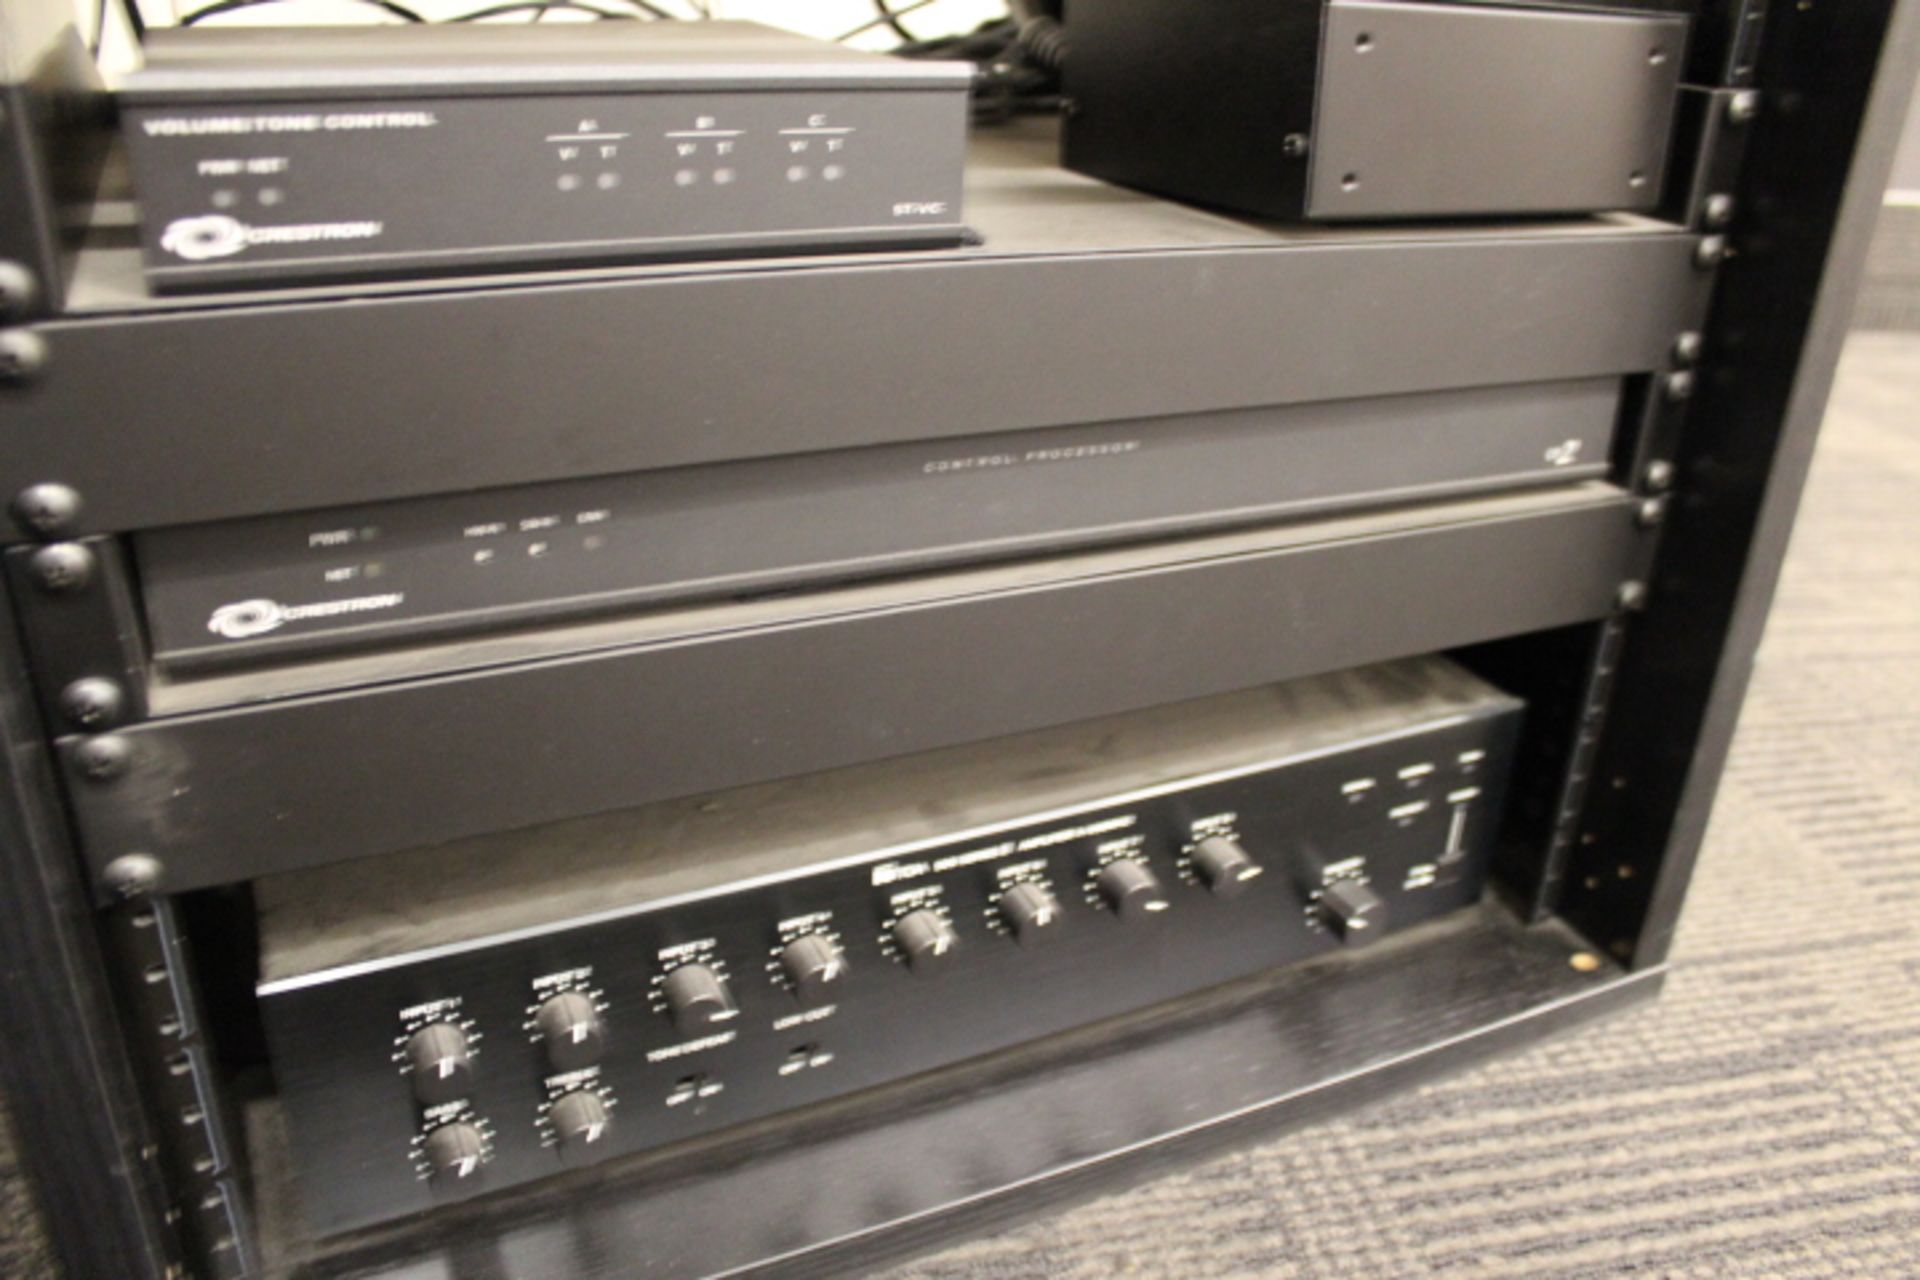 1 LOT, CRESTRON CP2, ST-VC, TOA900 AMP, TOSHIBA VHS/DICC, & CABINET ETC - Image 4 of 13